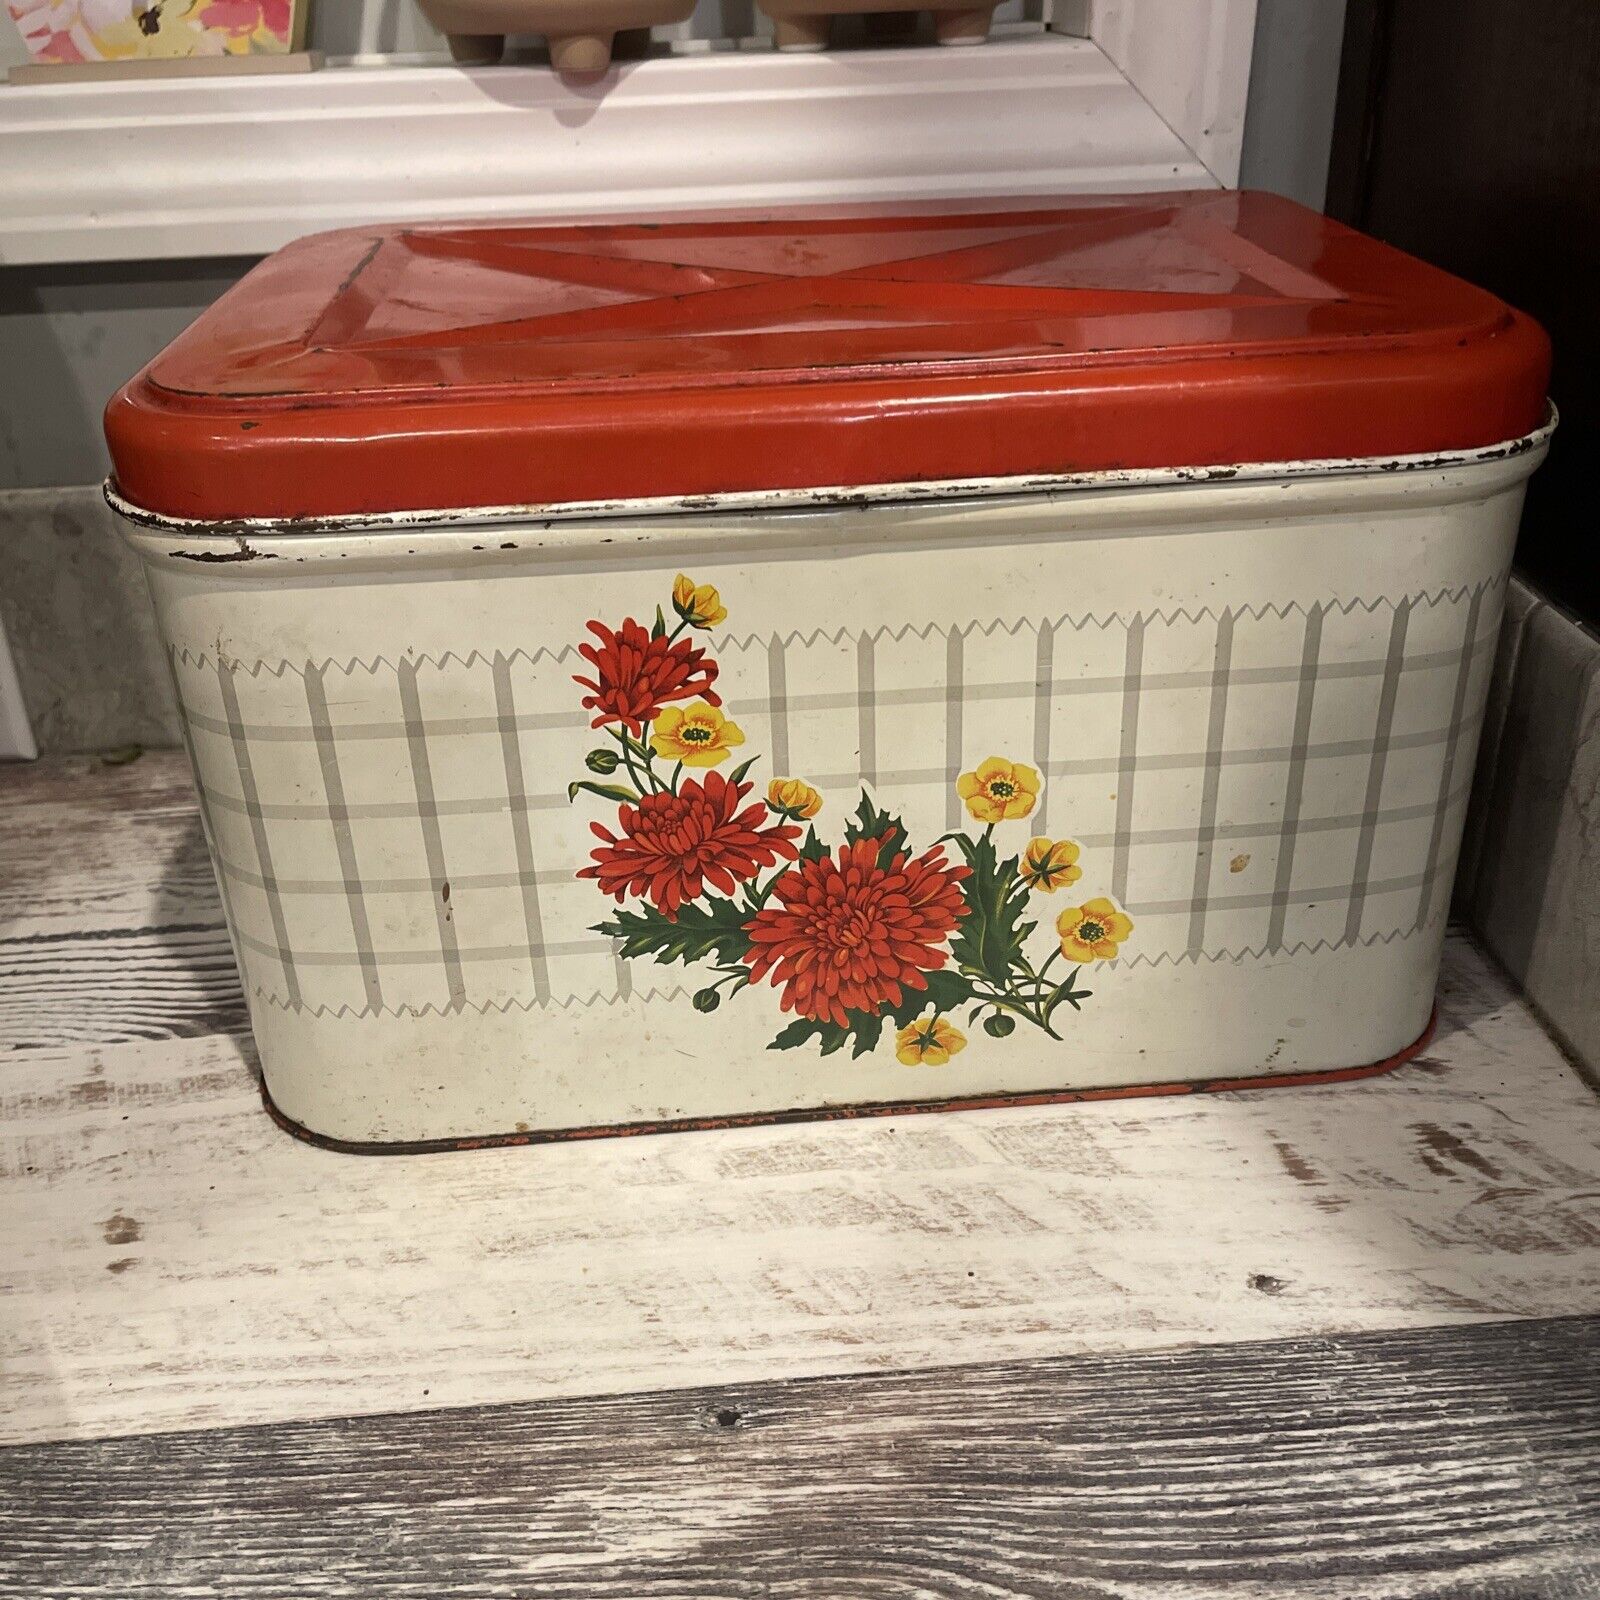 Antique Vintage Kitchen Metal Bread Box with Red Lid